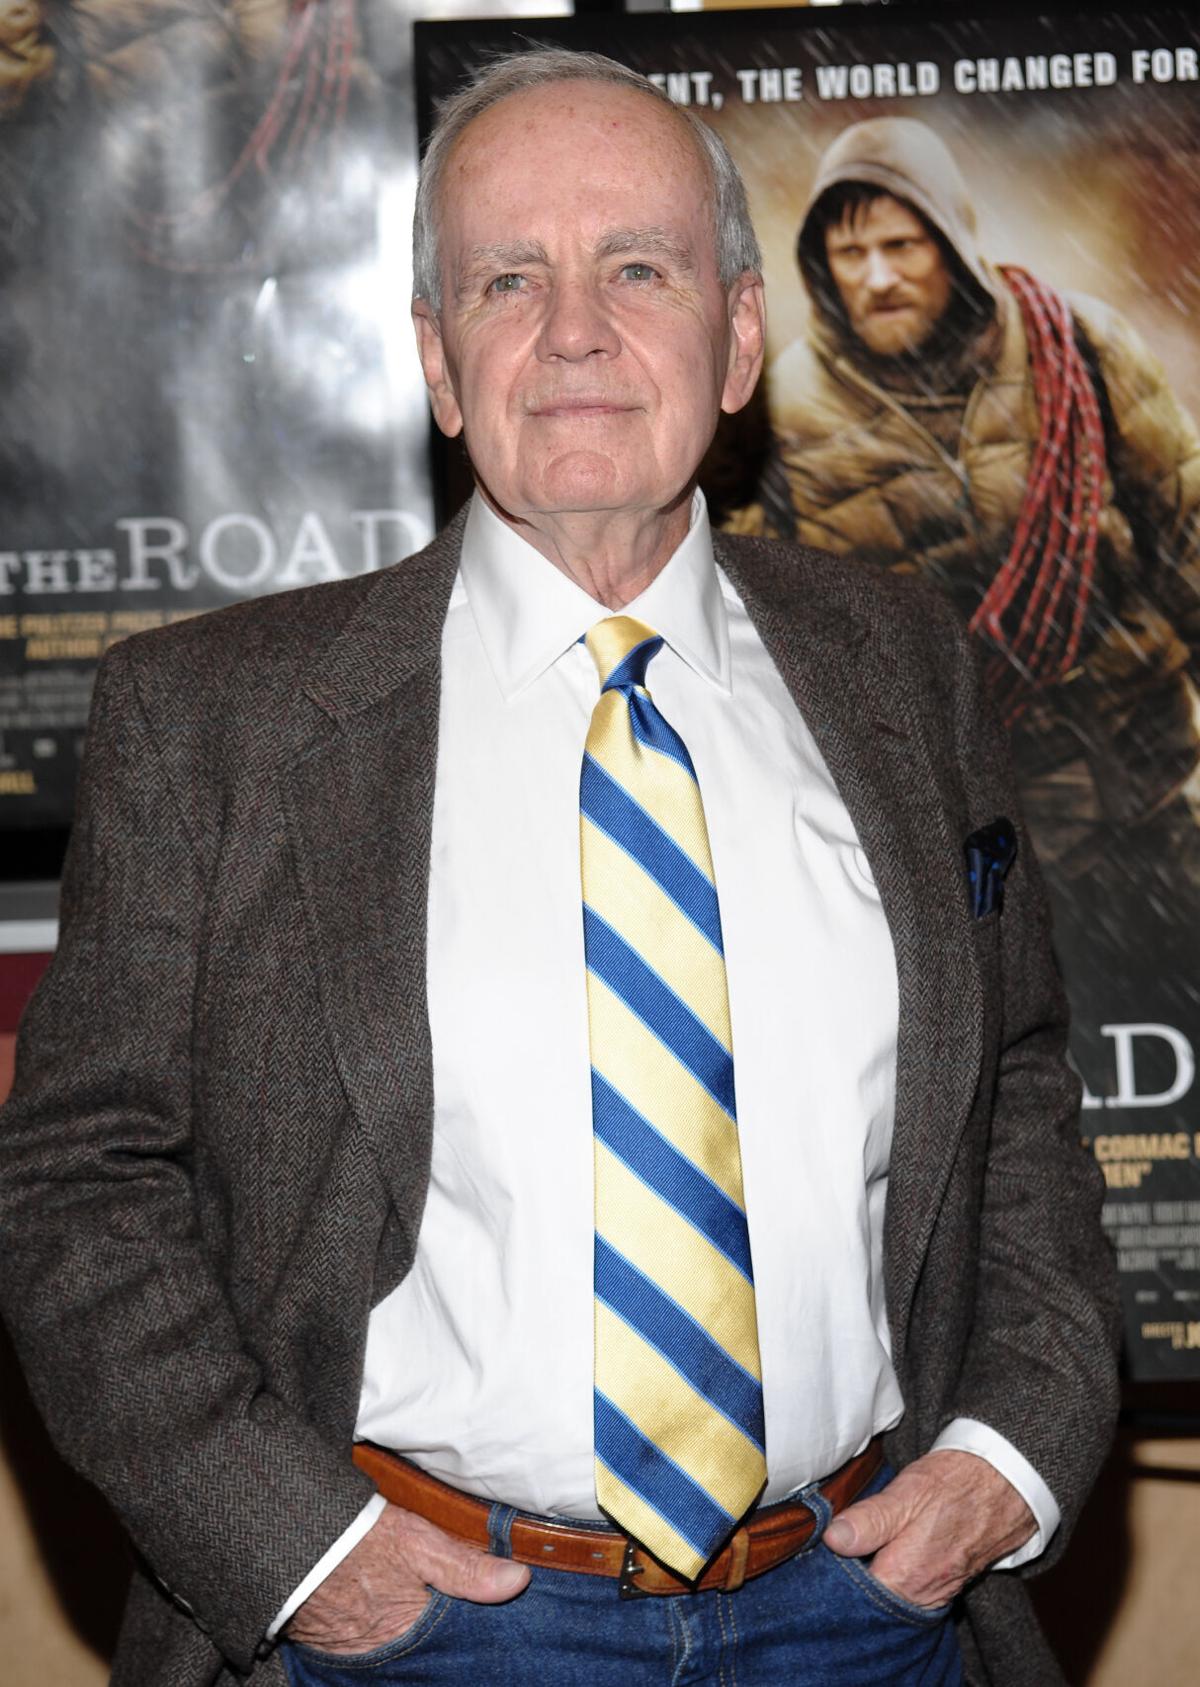 No Country for Old Men' author Cormac McCarthy dies at 89